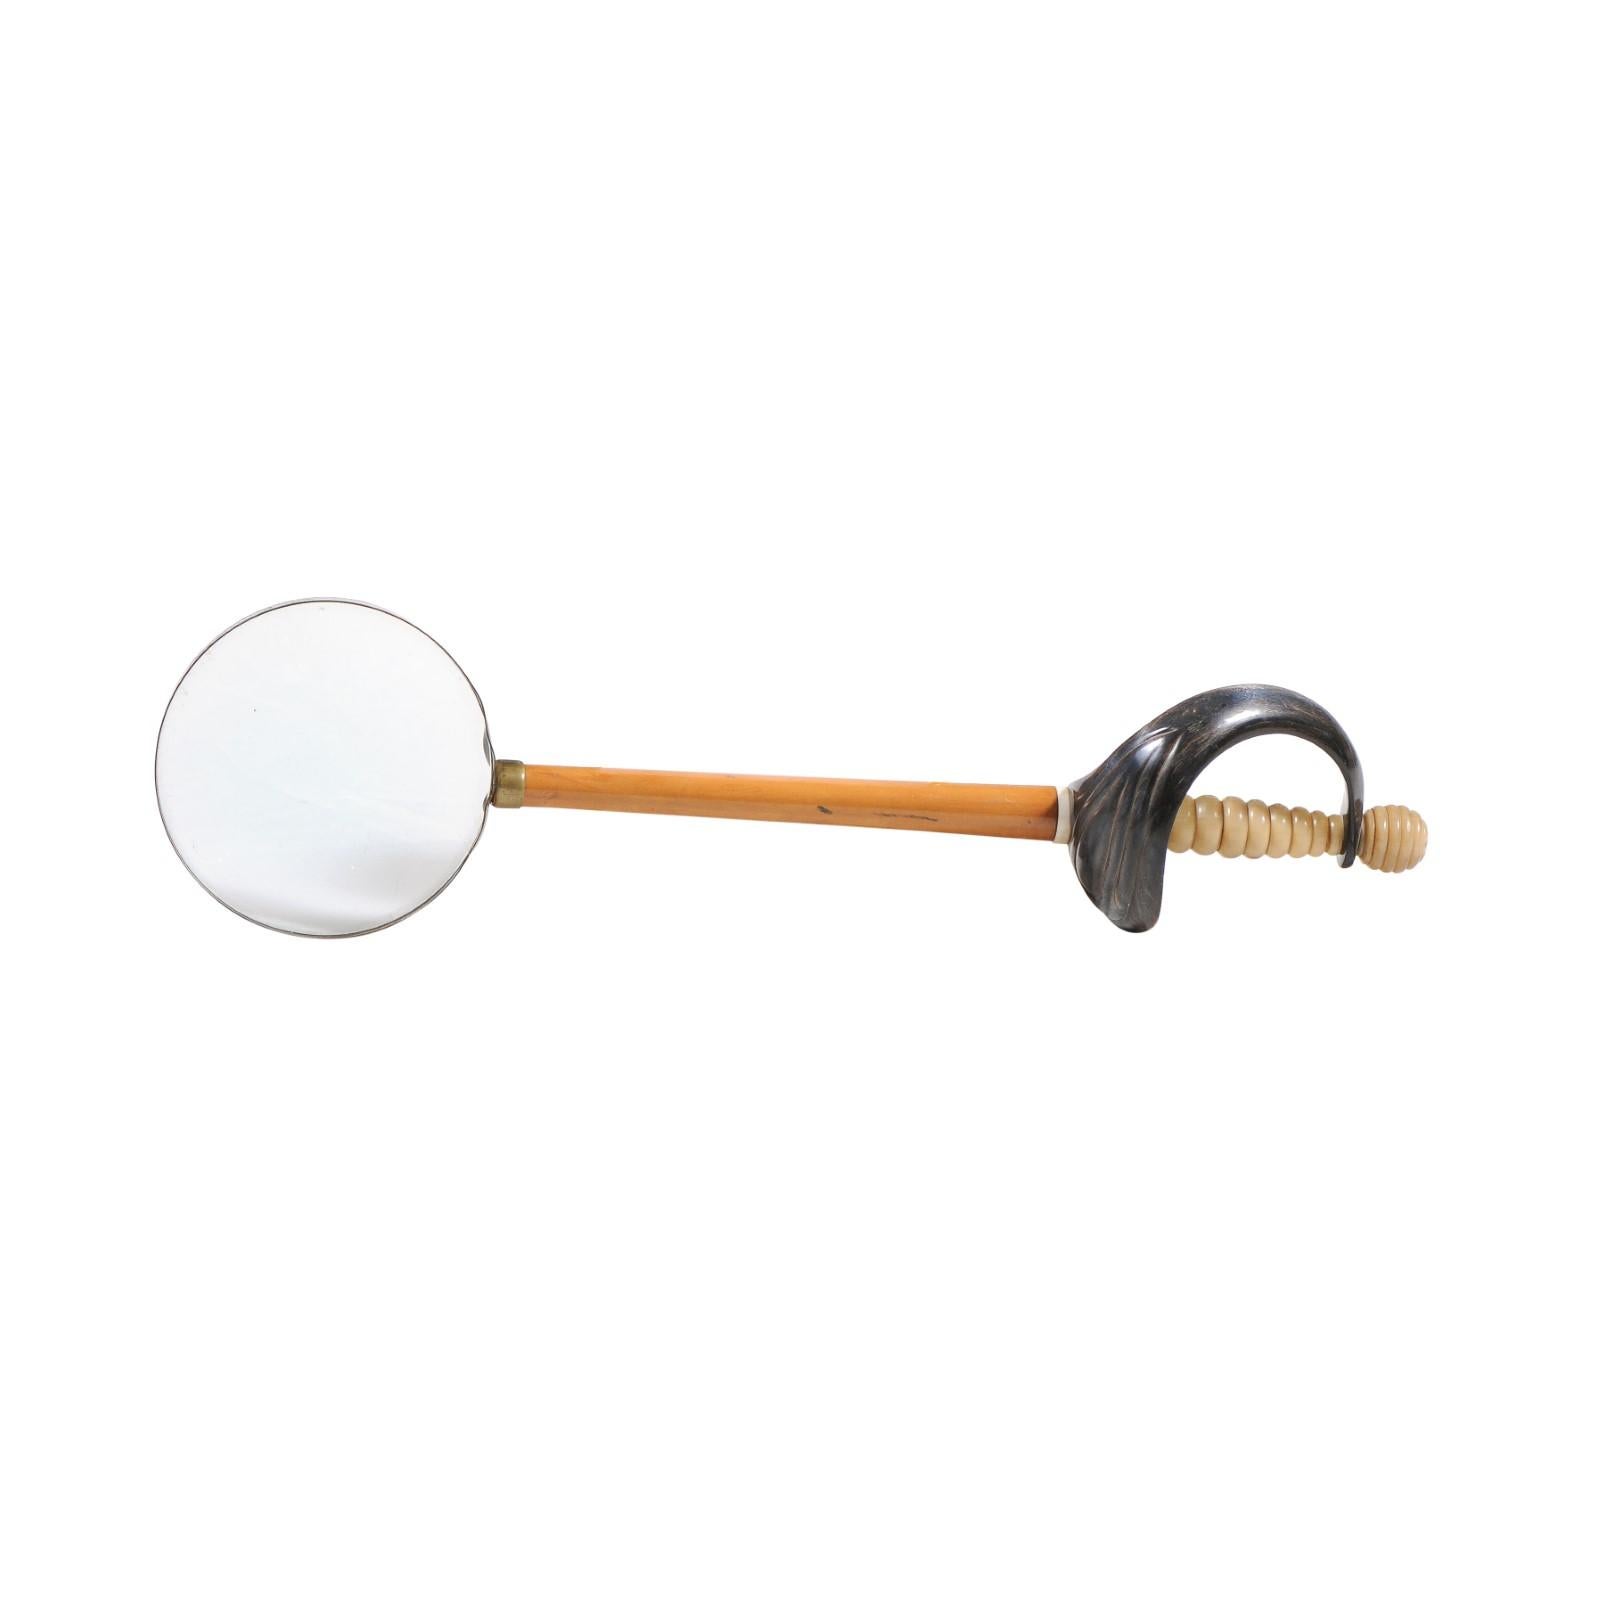 A large English Victorian period wooden magnifying glass from the 19th century, with sword handle. Created in England during the reign of Queen Victoria, this magnifying glass reminds us of the evolution of reading aids throughout the ages starting